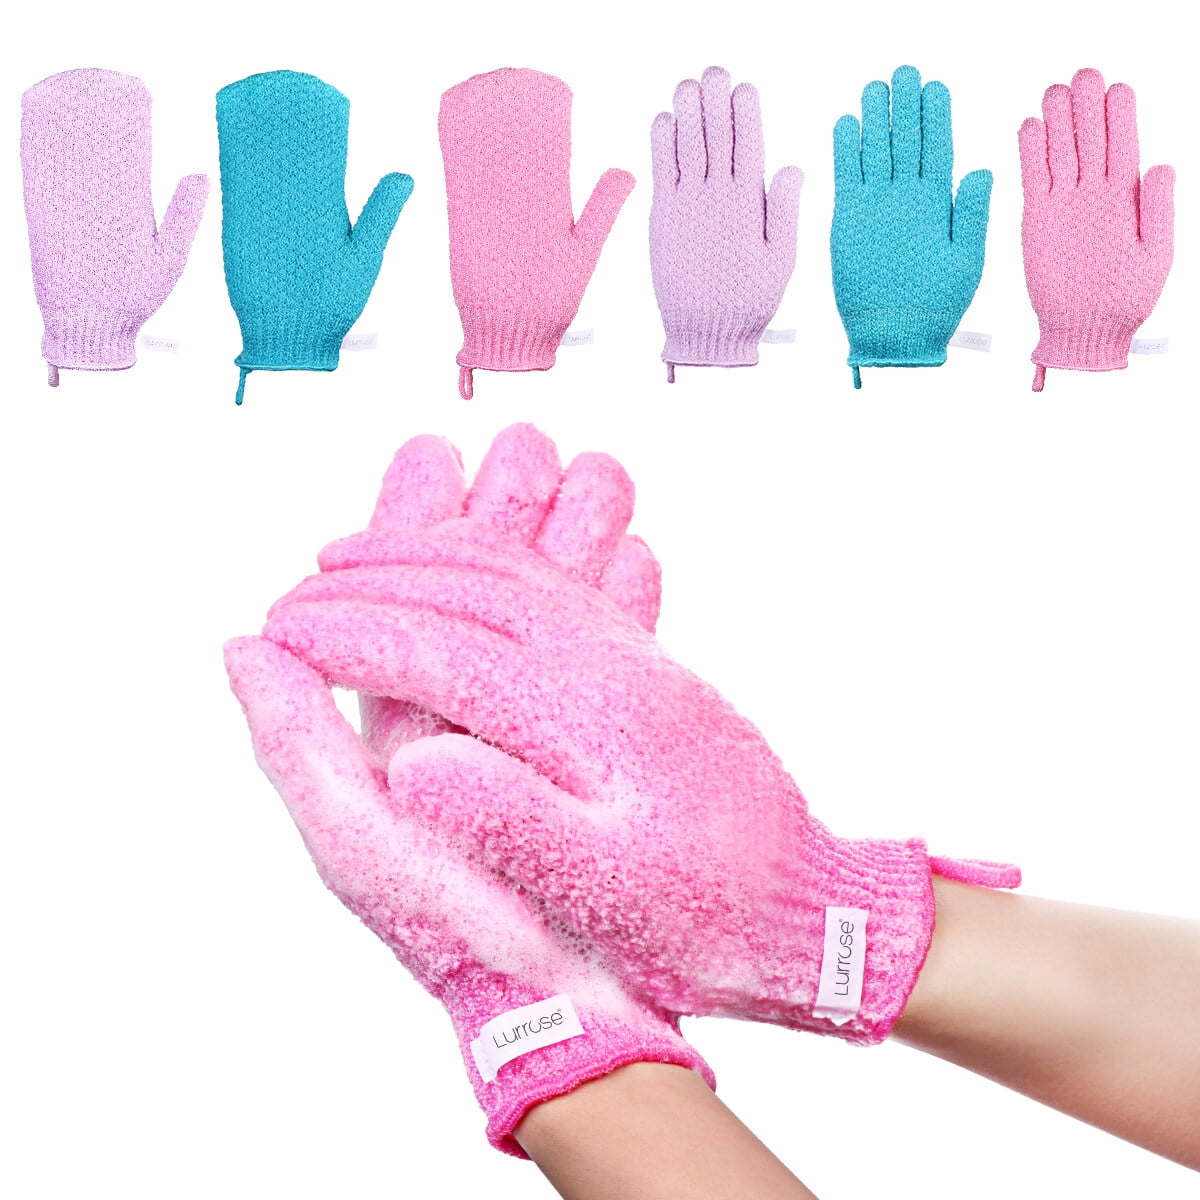 Soft Gel Spa Purple Gloves With Gel For Exfoliating, Moisturizing, And Hand  Mask Care Ideal For Womens Skin Beauty Treatment And Repair From  Fashion_show2017, $3.72